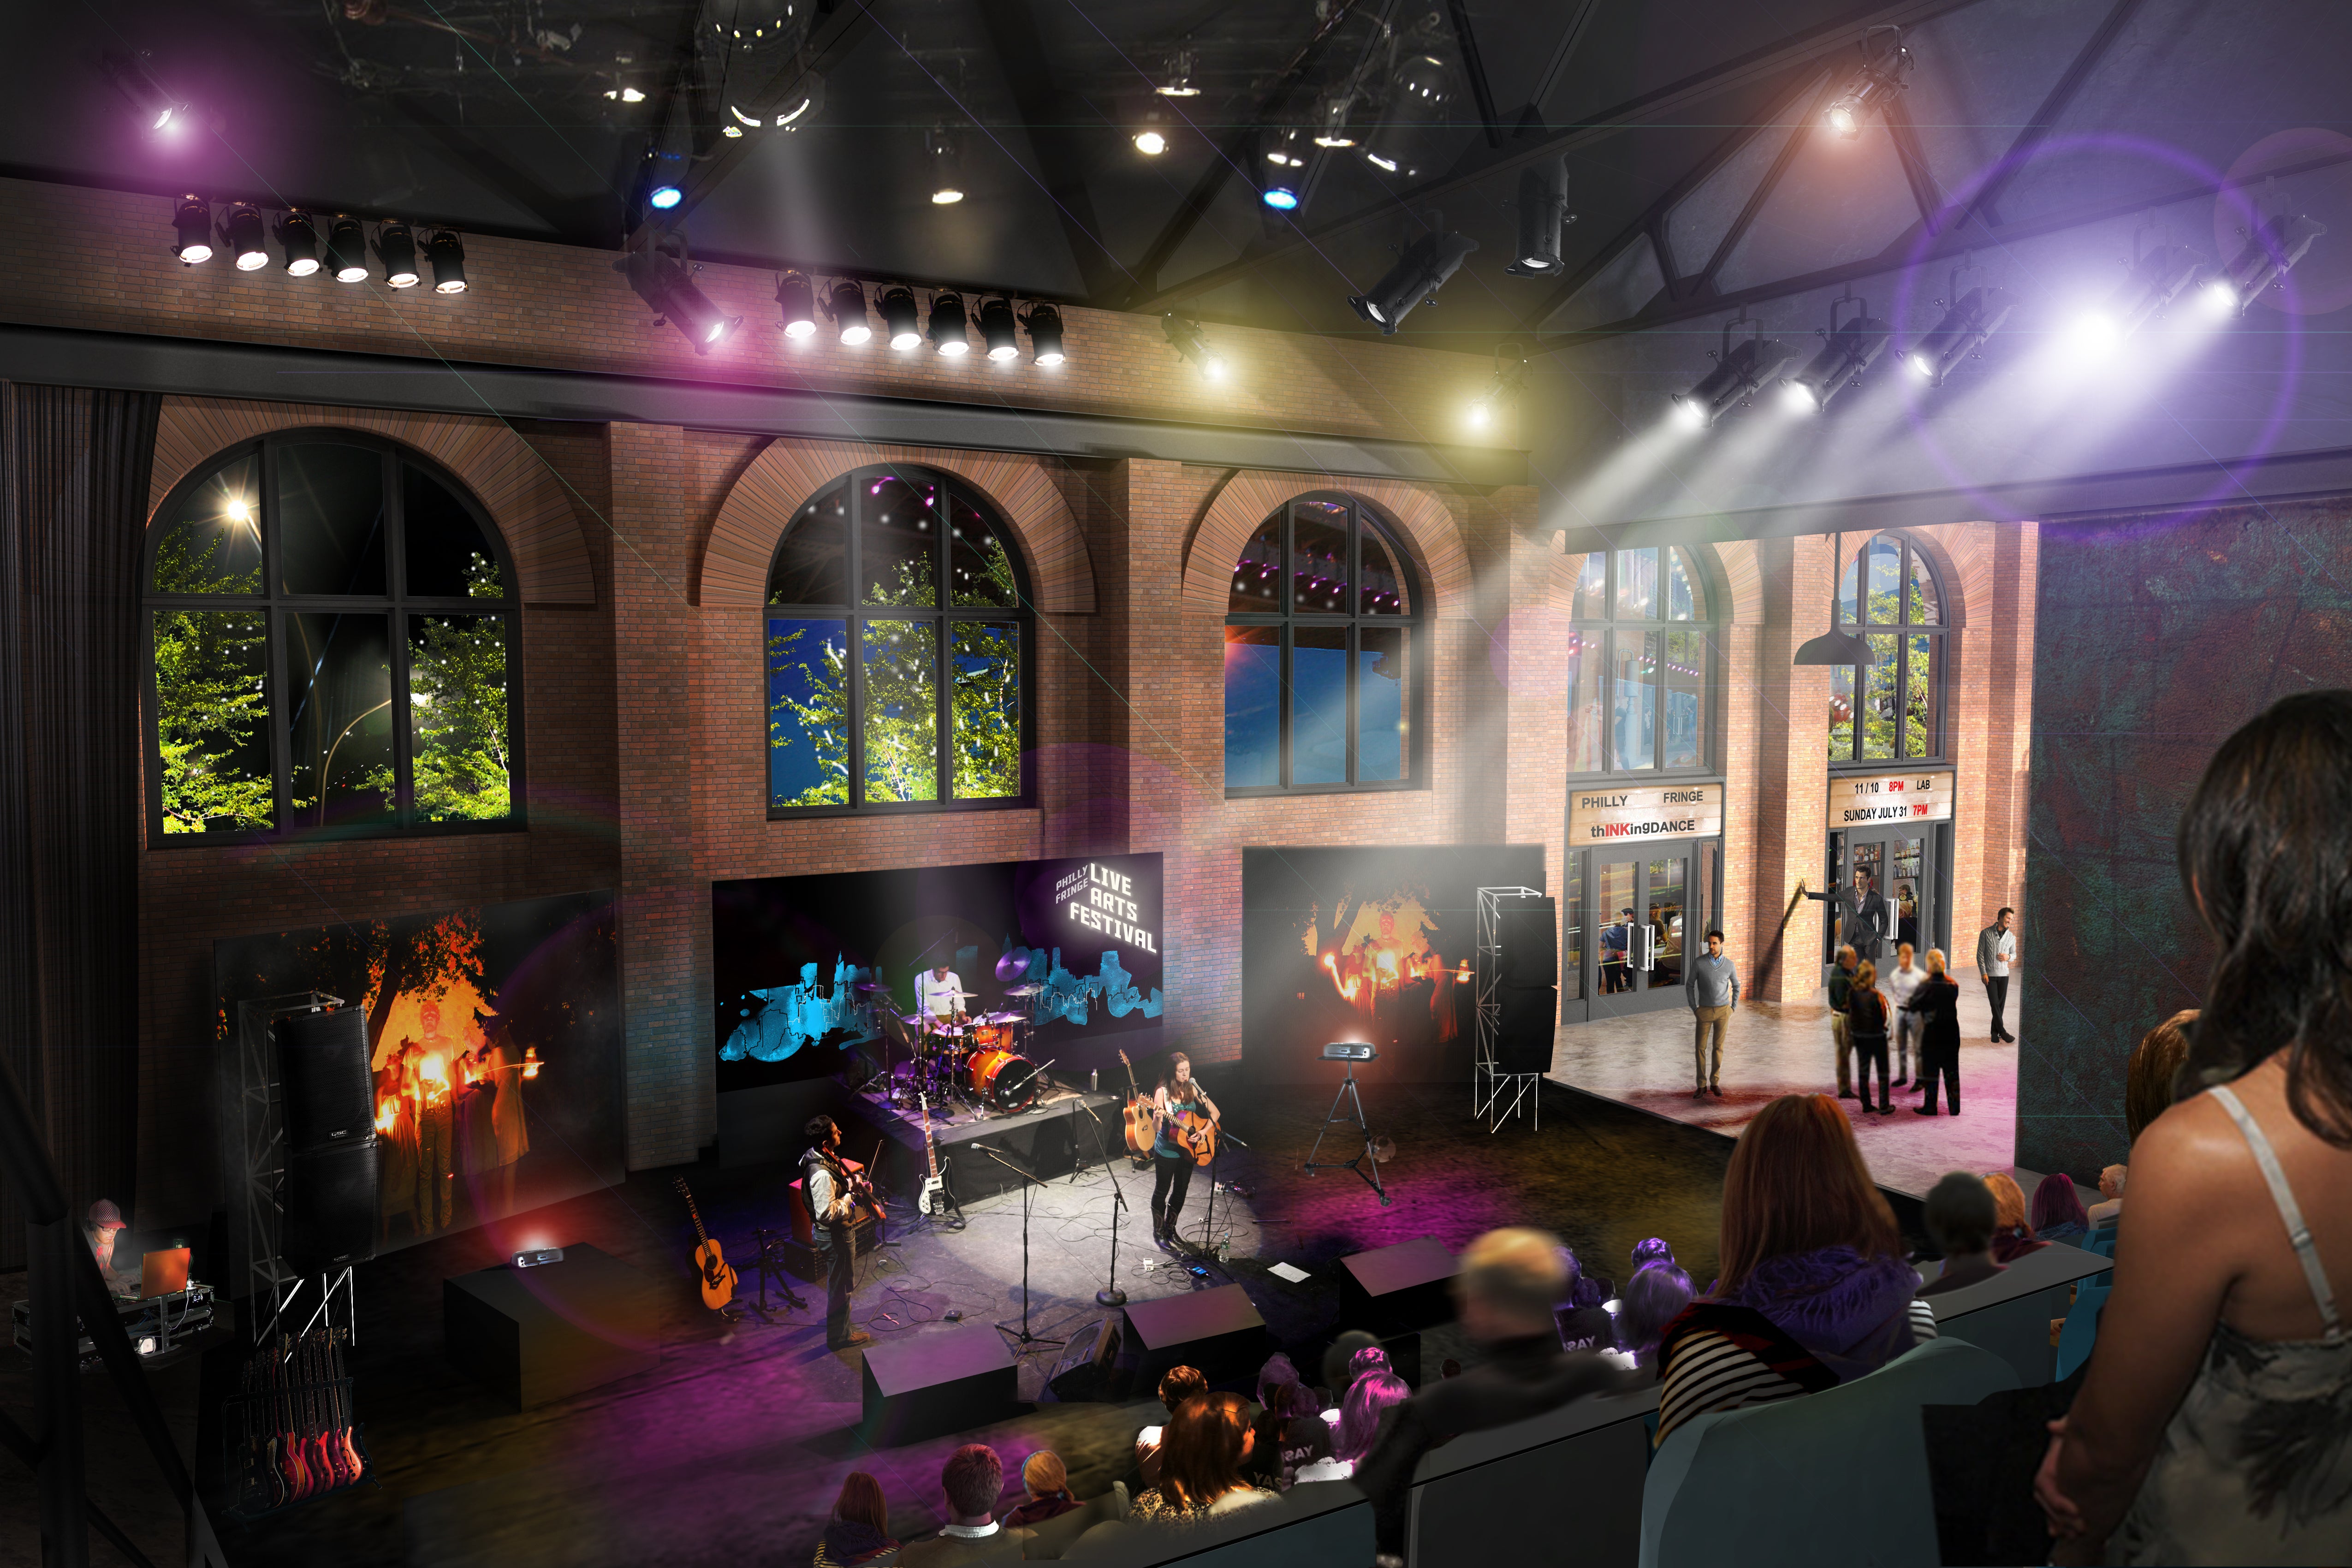 Rendering of the future concert space